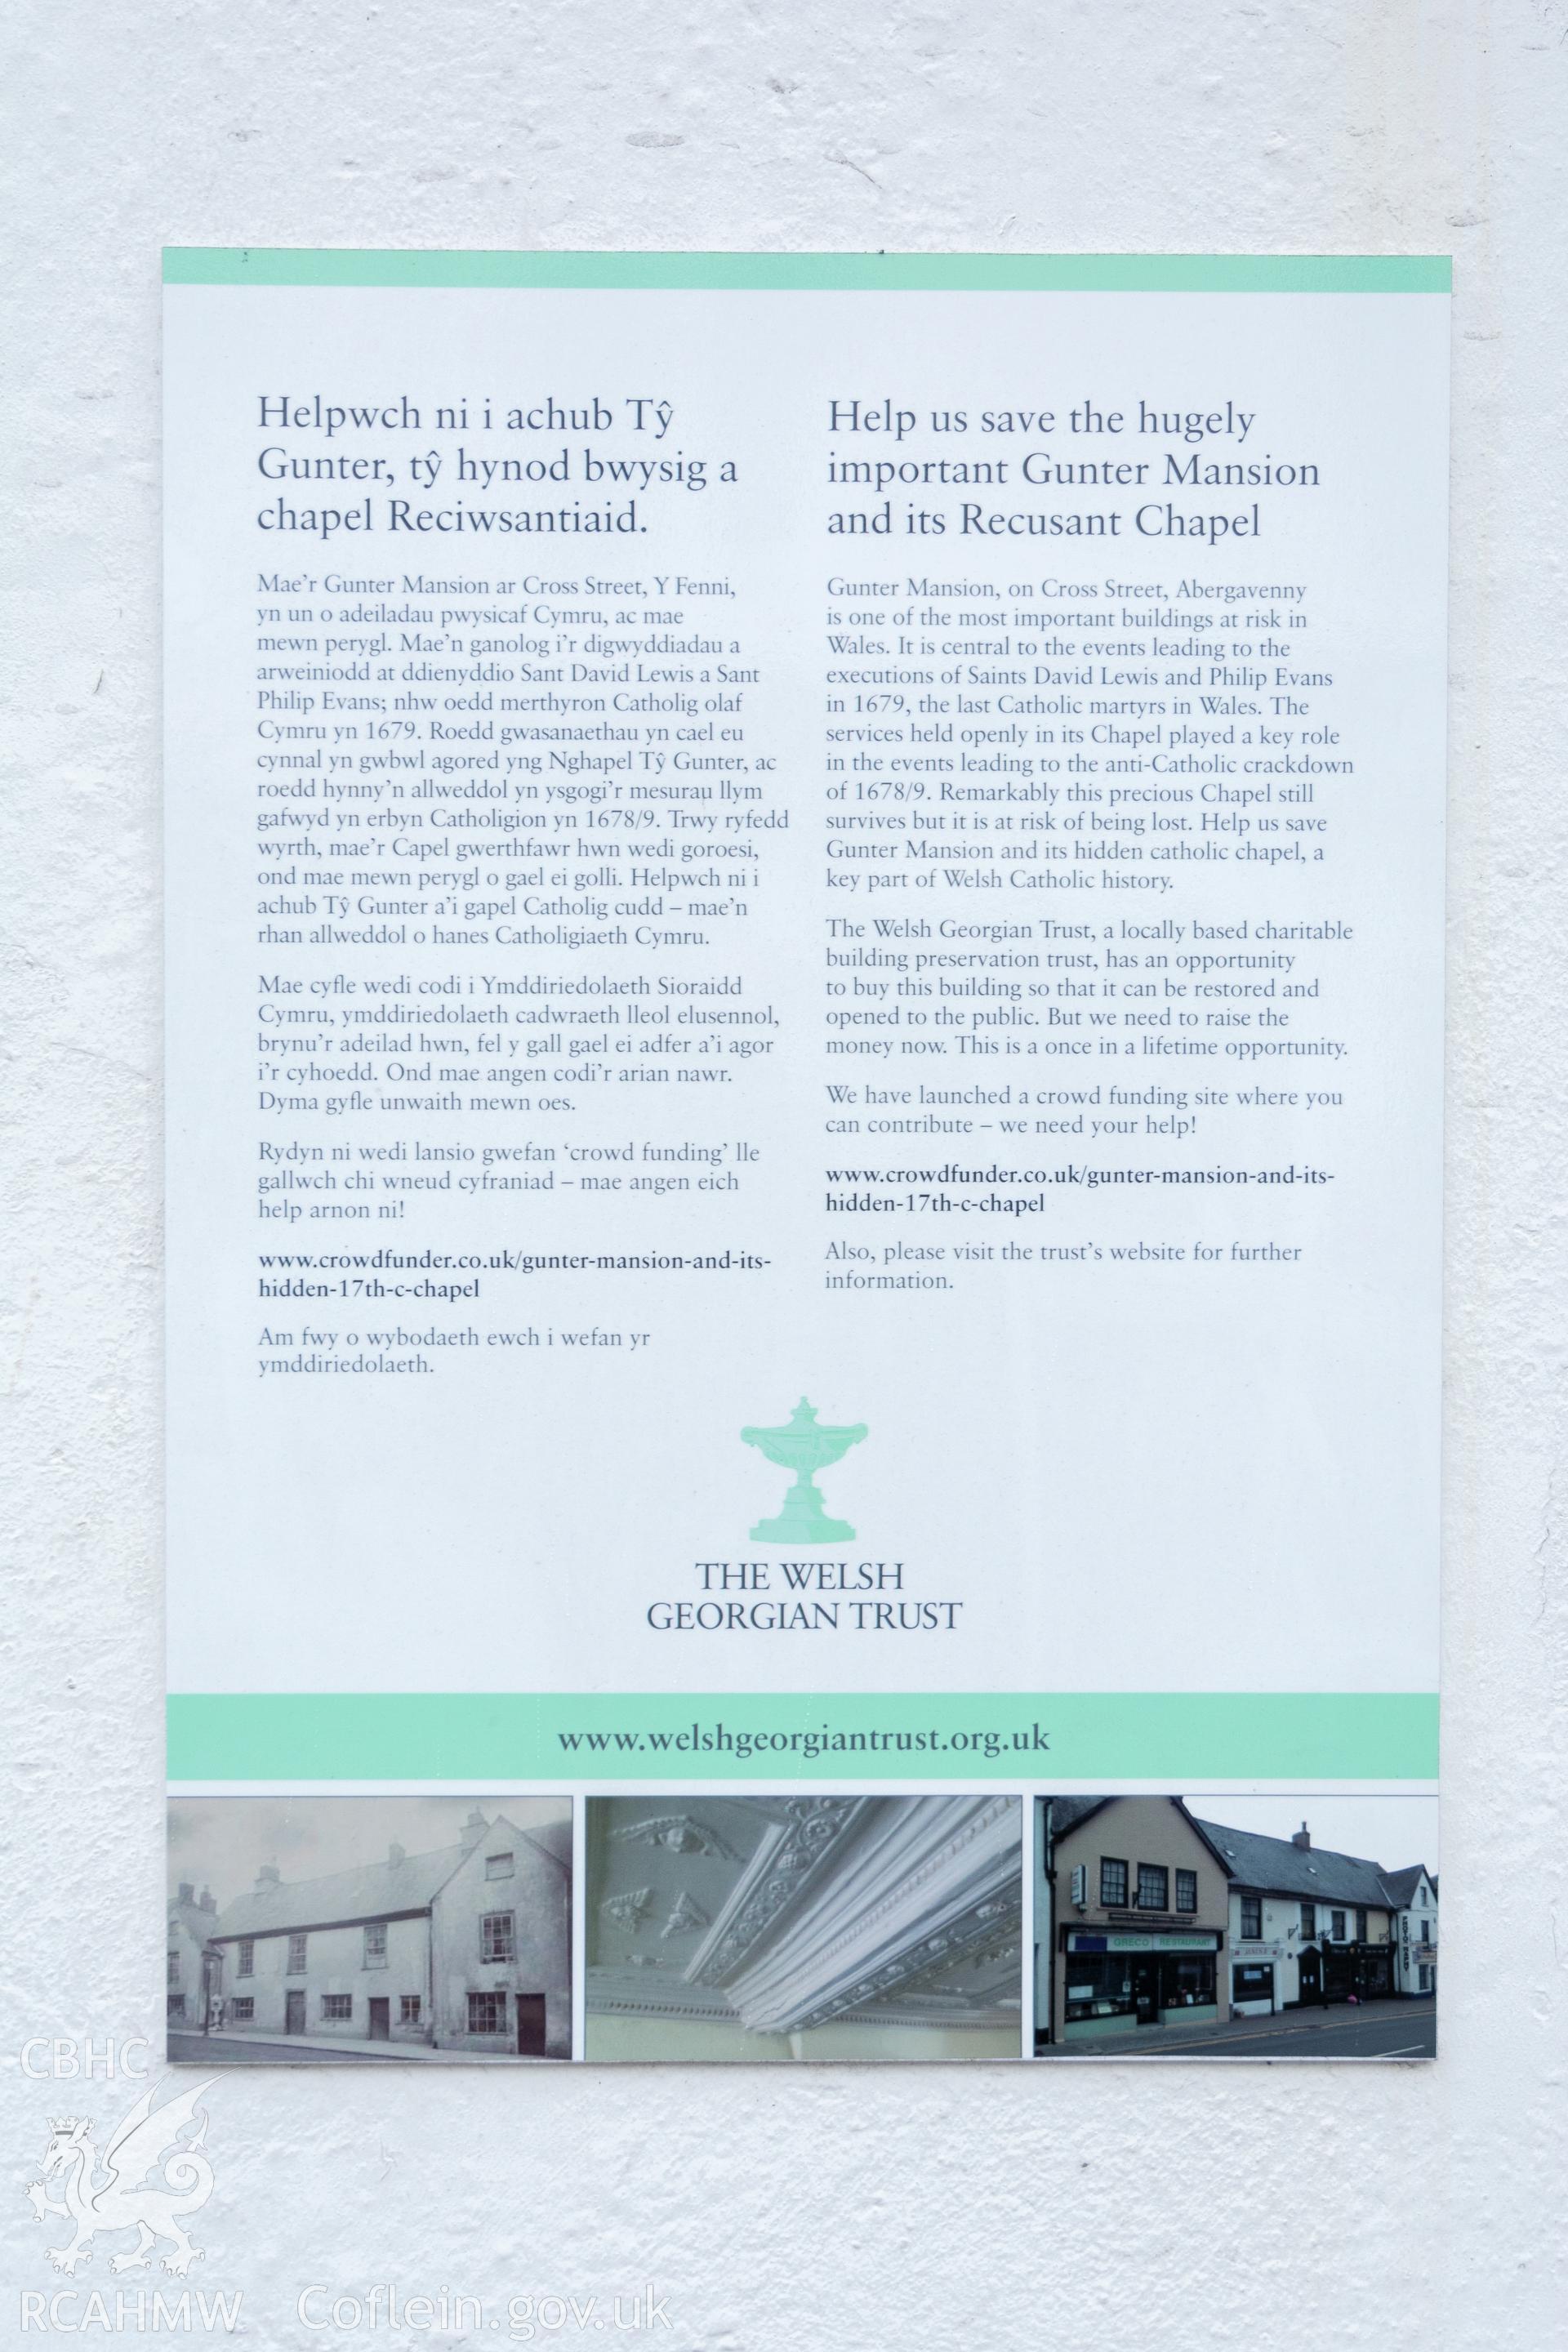 Notice showing Welsh Georgian Trust Appeal, taken by Martin Crampin for RCAHMW 21st March 2017.